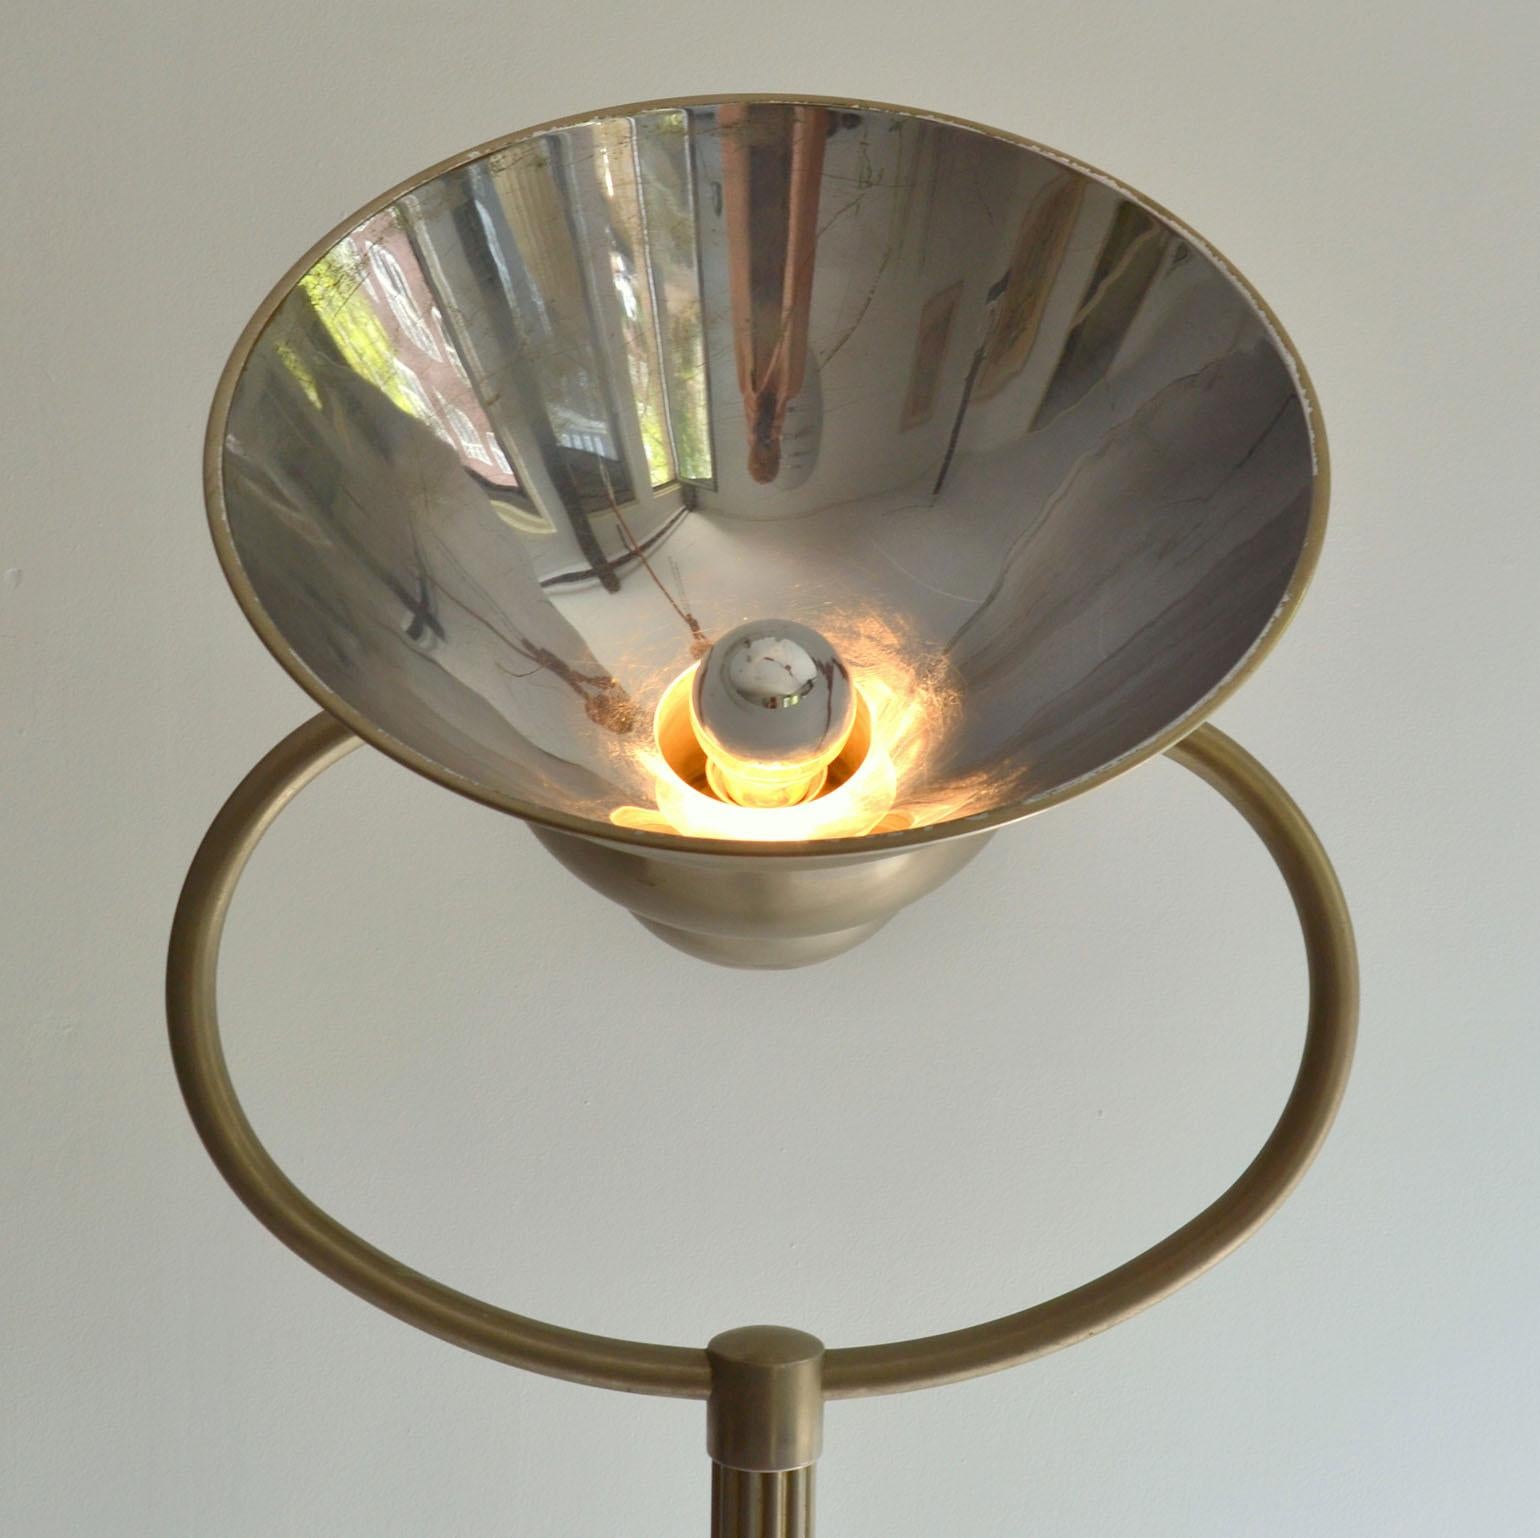 Art Deco Floor Lamp 1920's with Adjustable Shade in Nickel Attributed to Gispen  For Sale 8